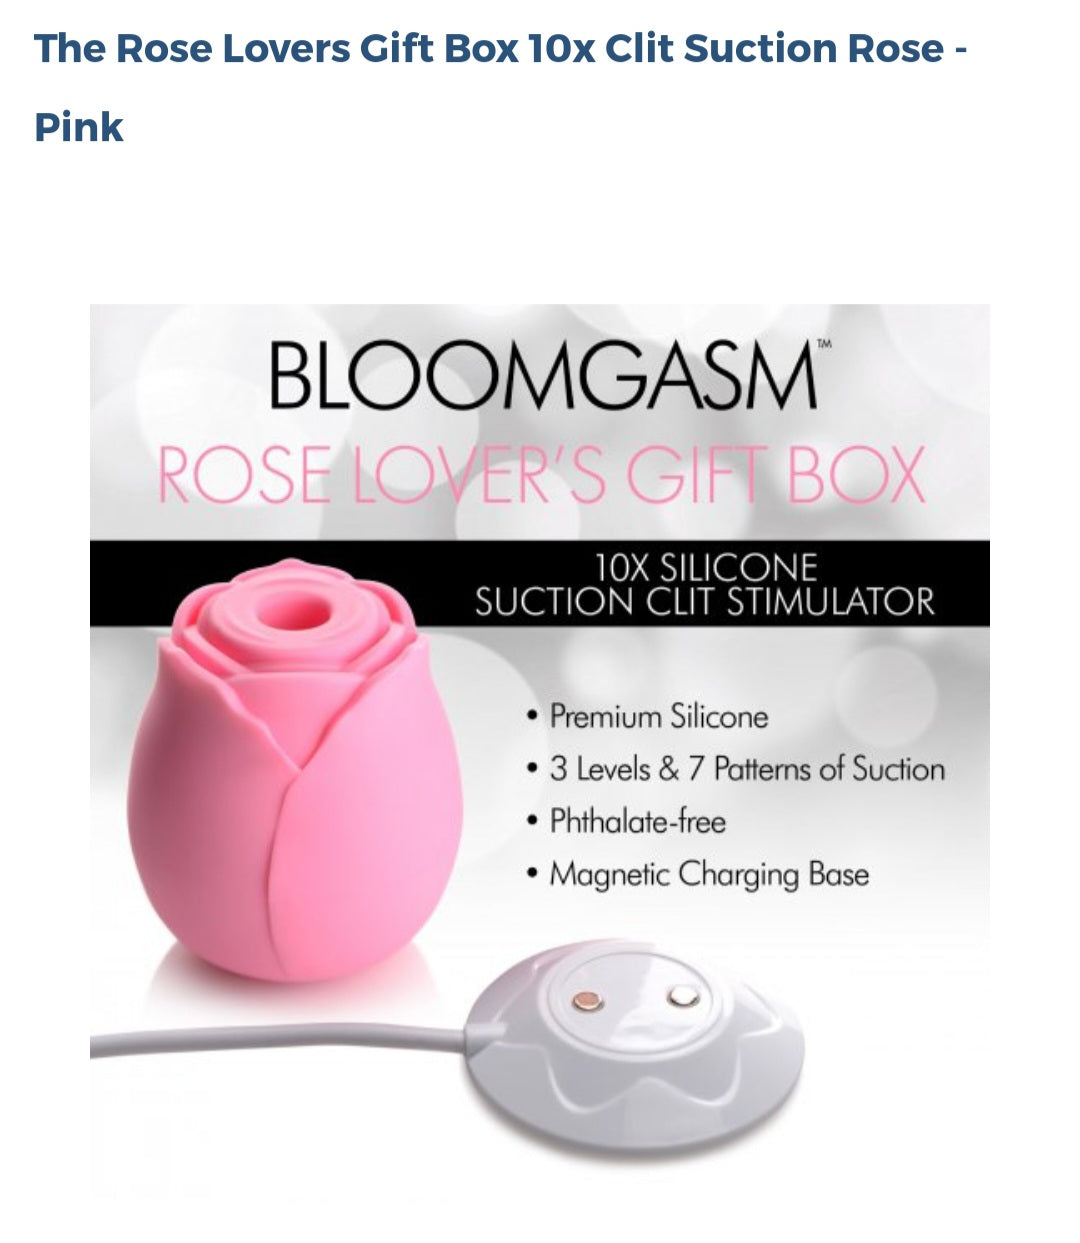 The Rose Lovers Gift Box Clit Suction Rose-Pink